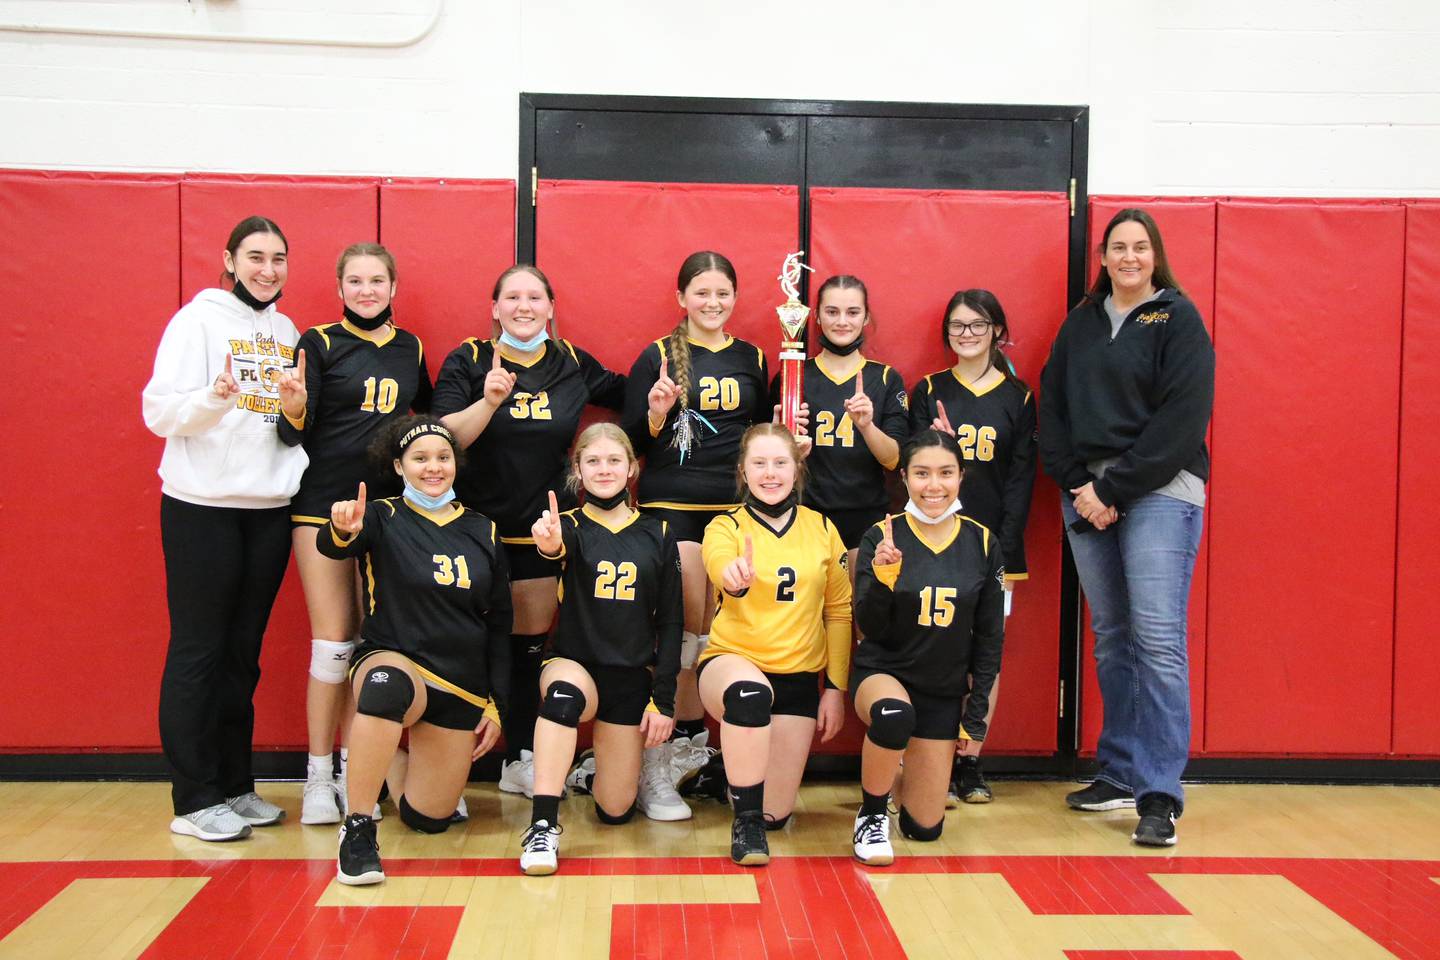 The Putnam County 8th grade volleyball team won the Marsailles Tournament. The Lady Pumas defeated MVP in the first round 21-25, 25-20,15-9 and Marsailles 25-19, 25-22 to advance to the championship to defeat Ottawa Marquette 25-23, 25-21. Team members are (front row) Emmalee Waclaw, Lanie Caukins, Cadie Bickett and Ashley Cano; and (back row) assistant coach Madison Solomon, Myah Richardson, Ella Irwin, Teaghan Gualandi-Sarcee, Ella Pyszka, Addy Leatherman and head coach Shannon Jenkins.